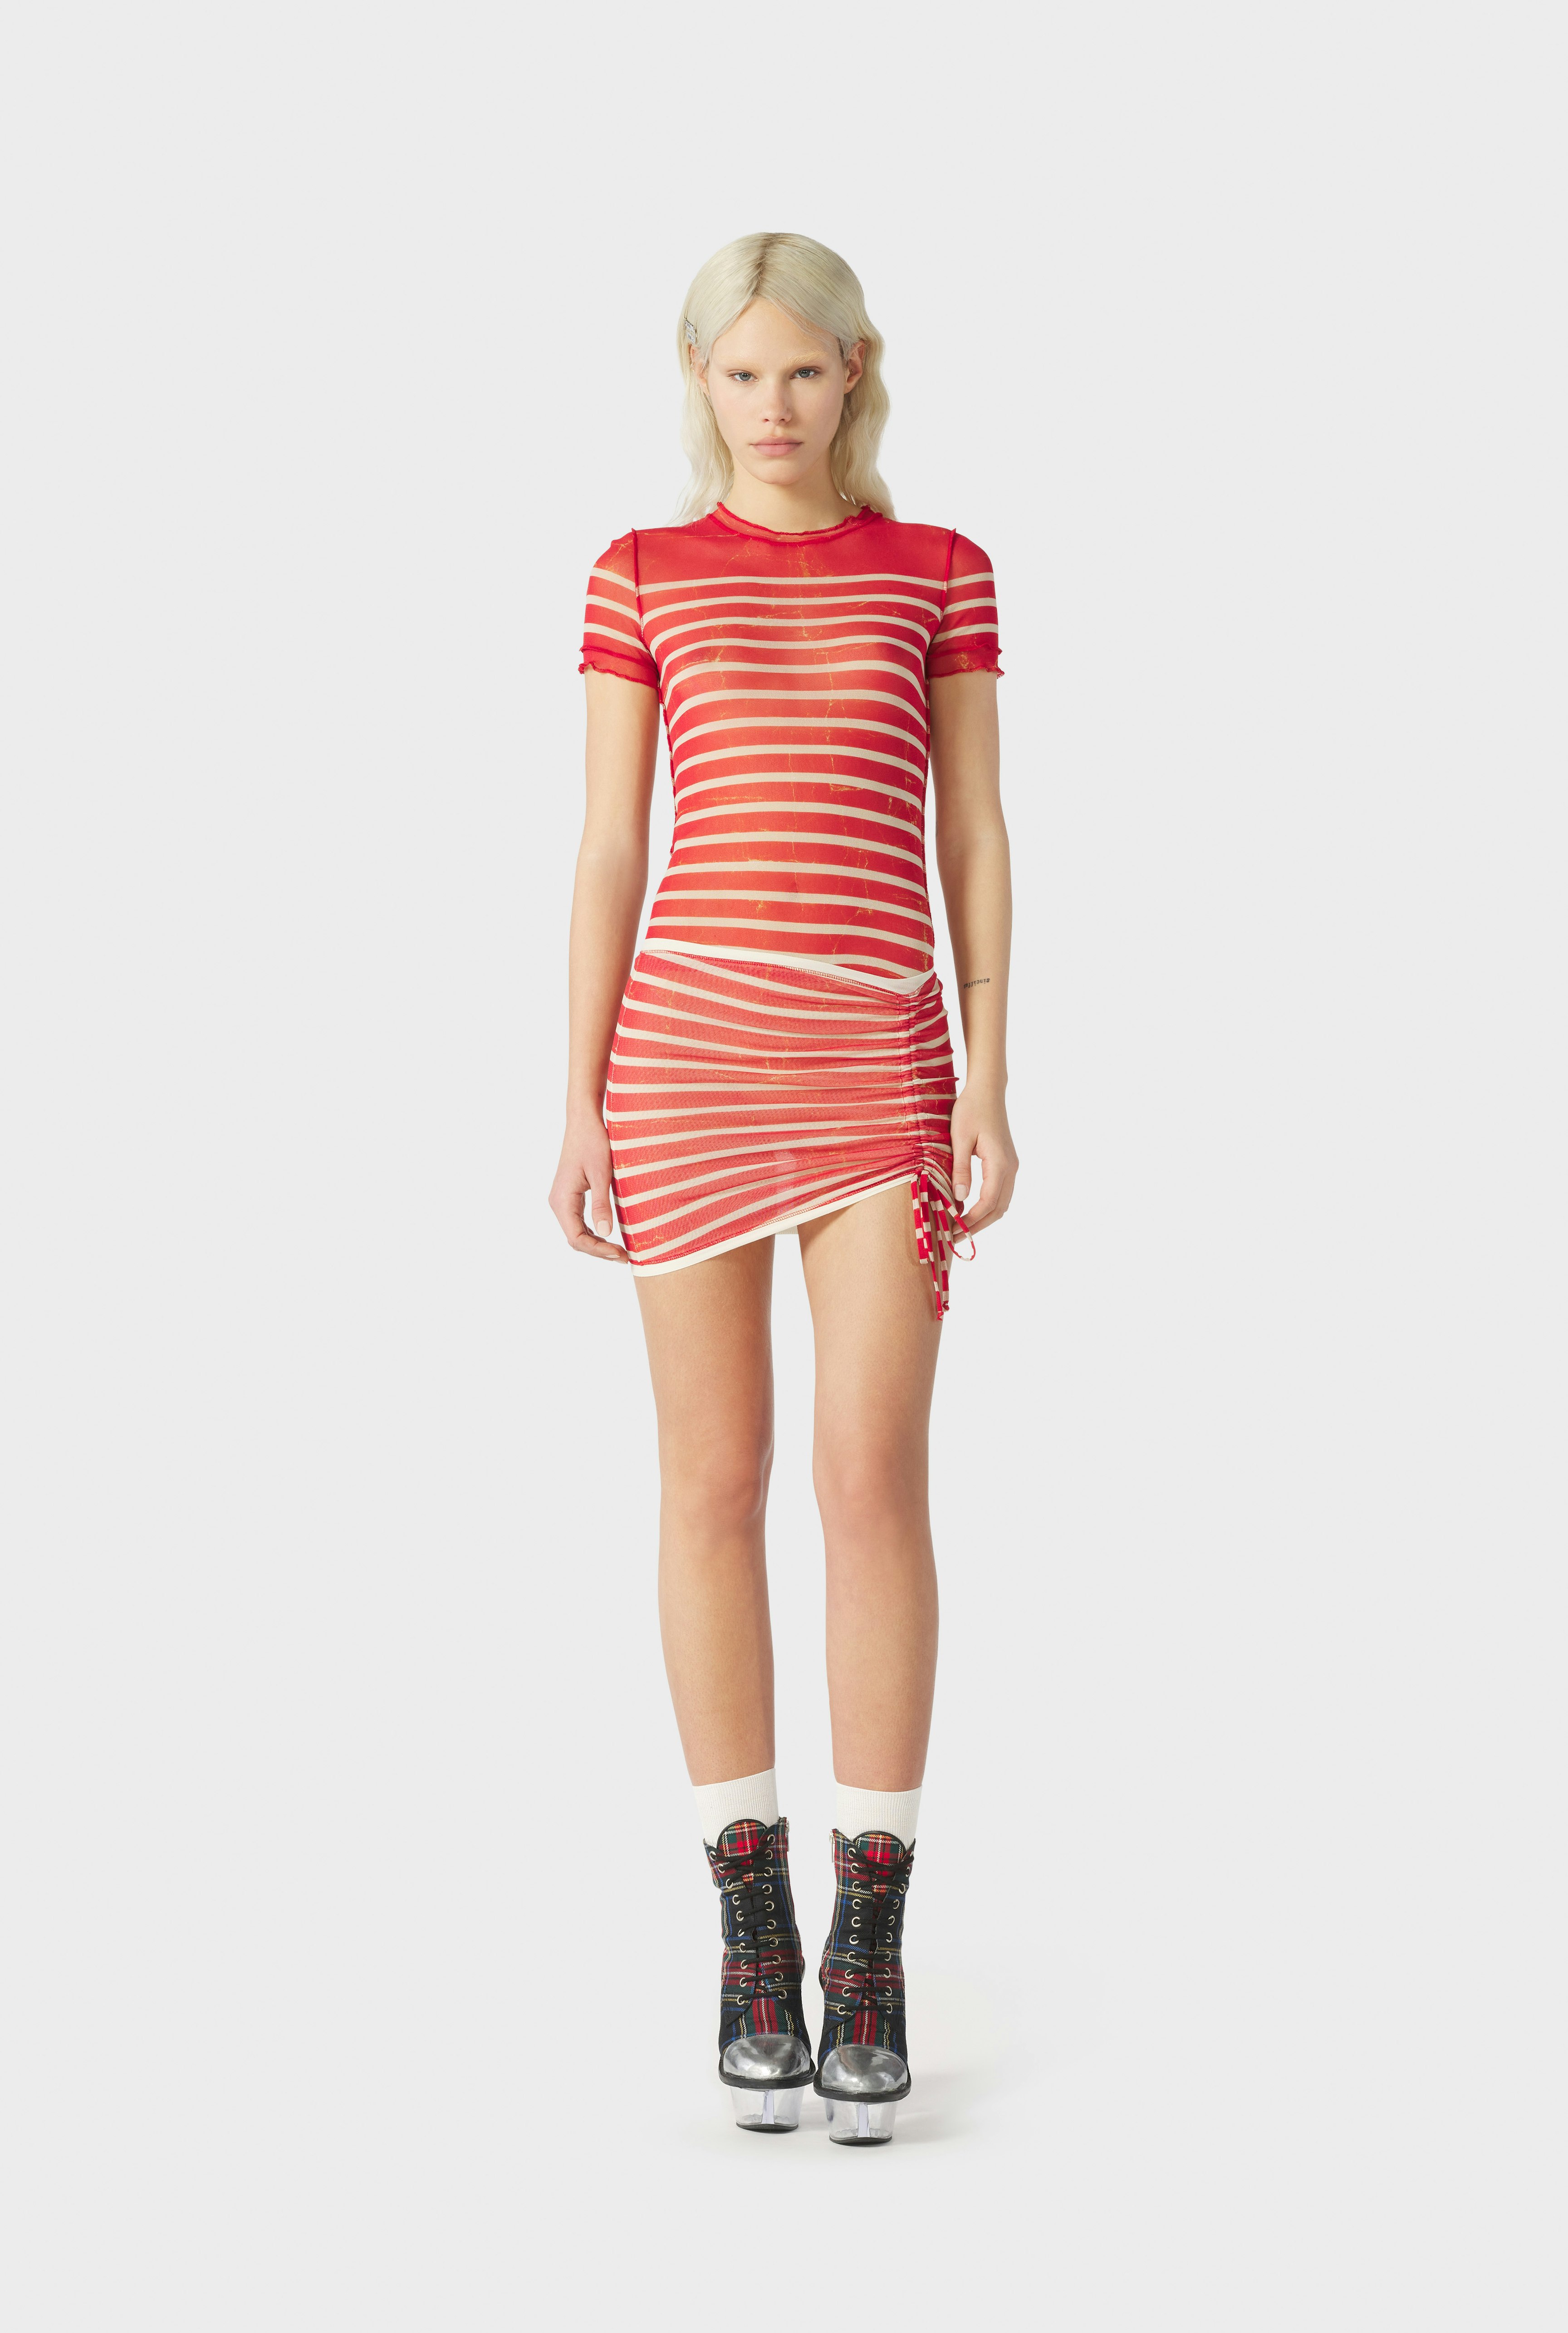 The Red “Crackling” Sailor Top hover